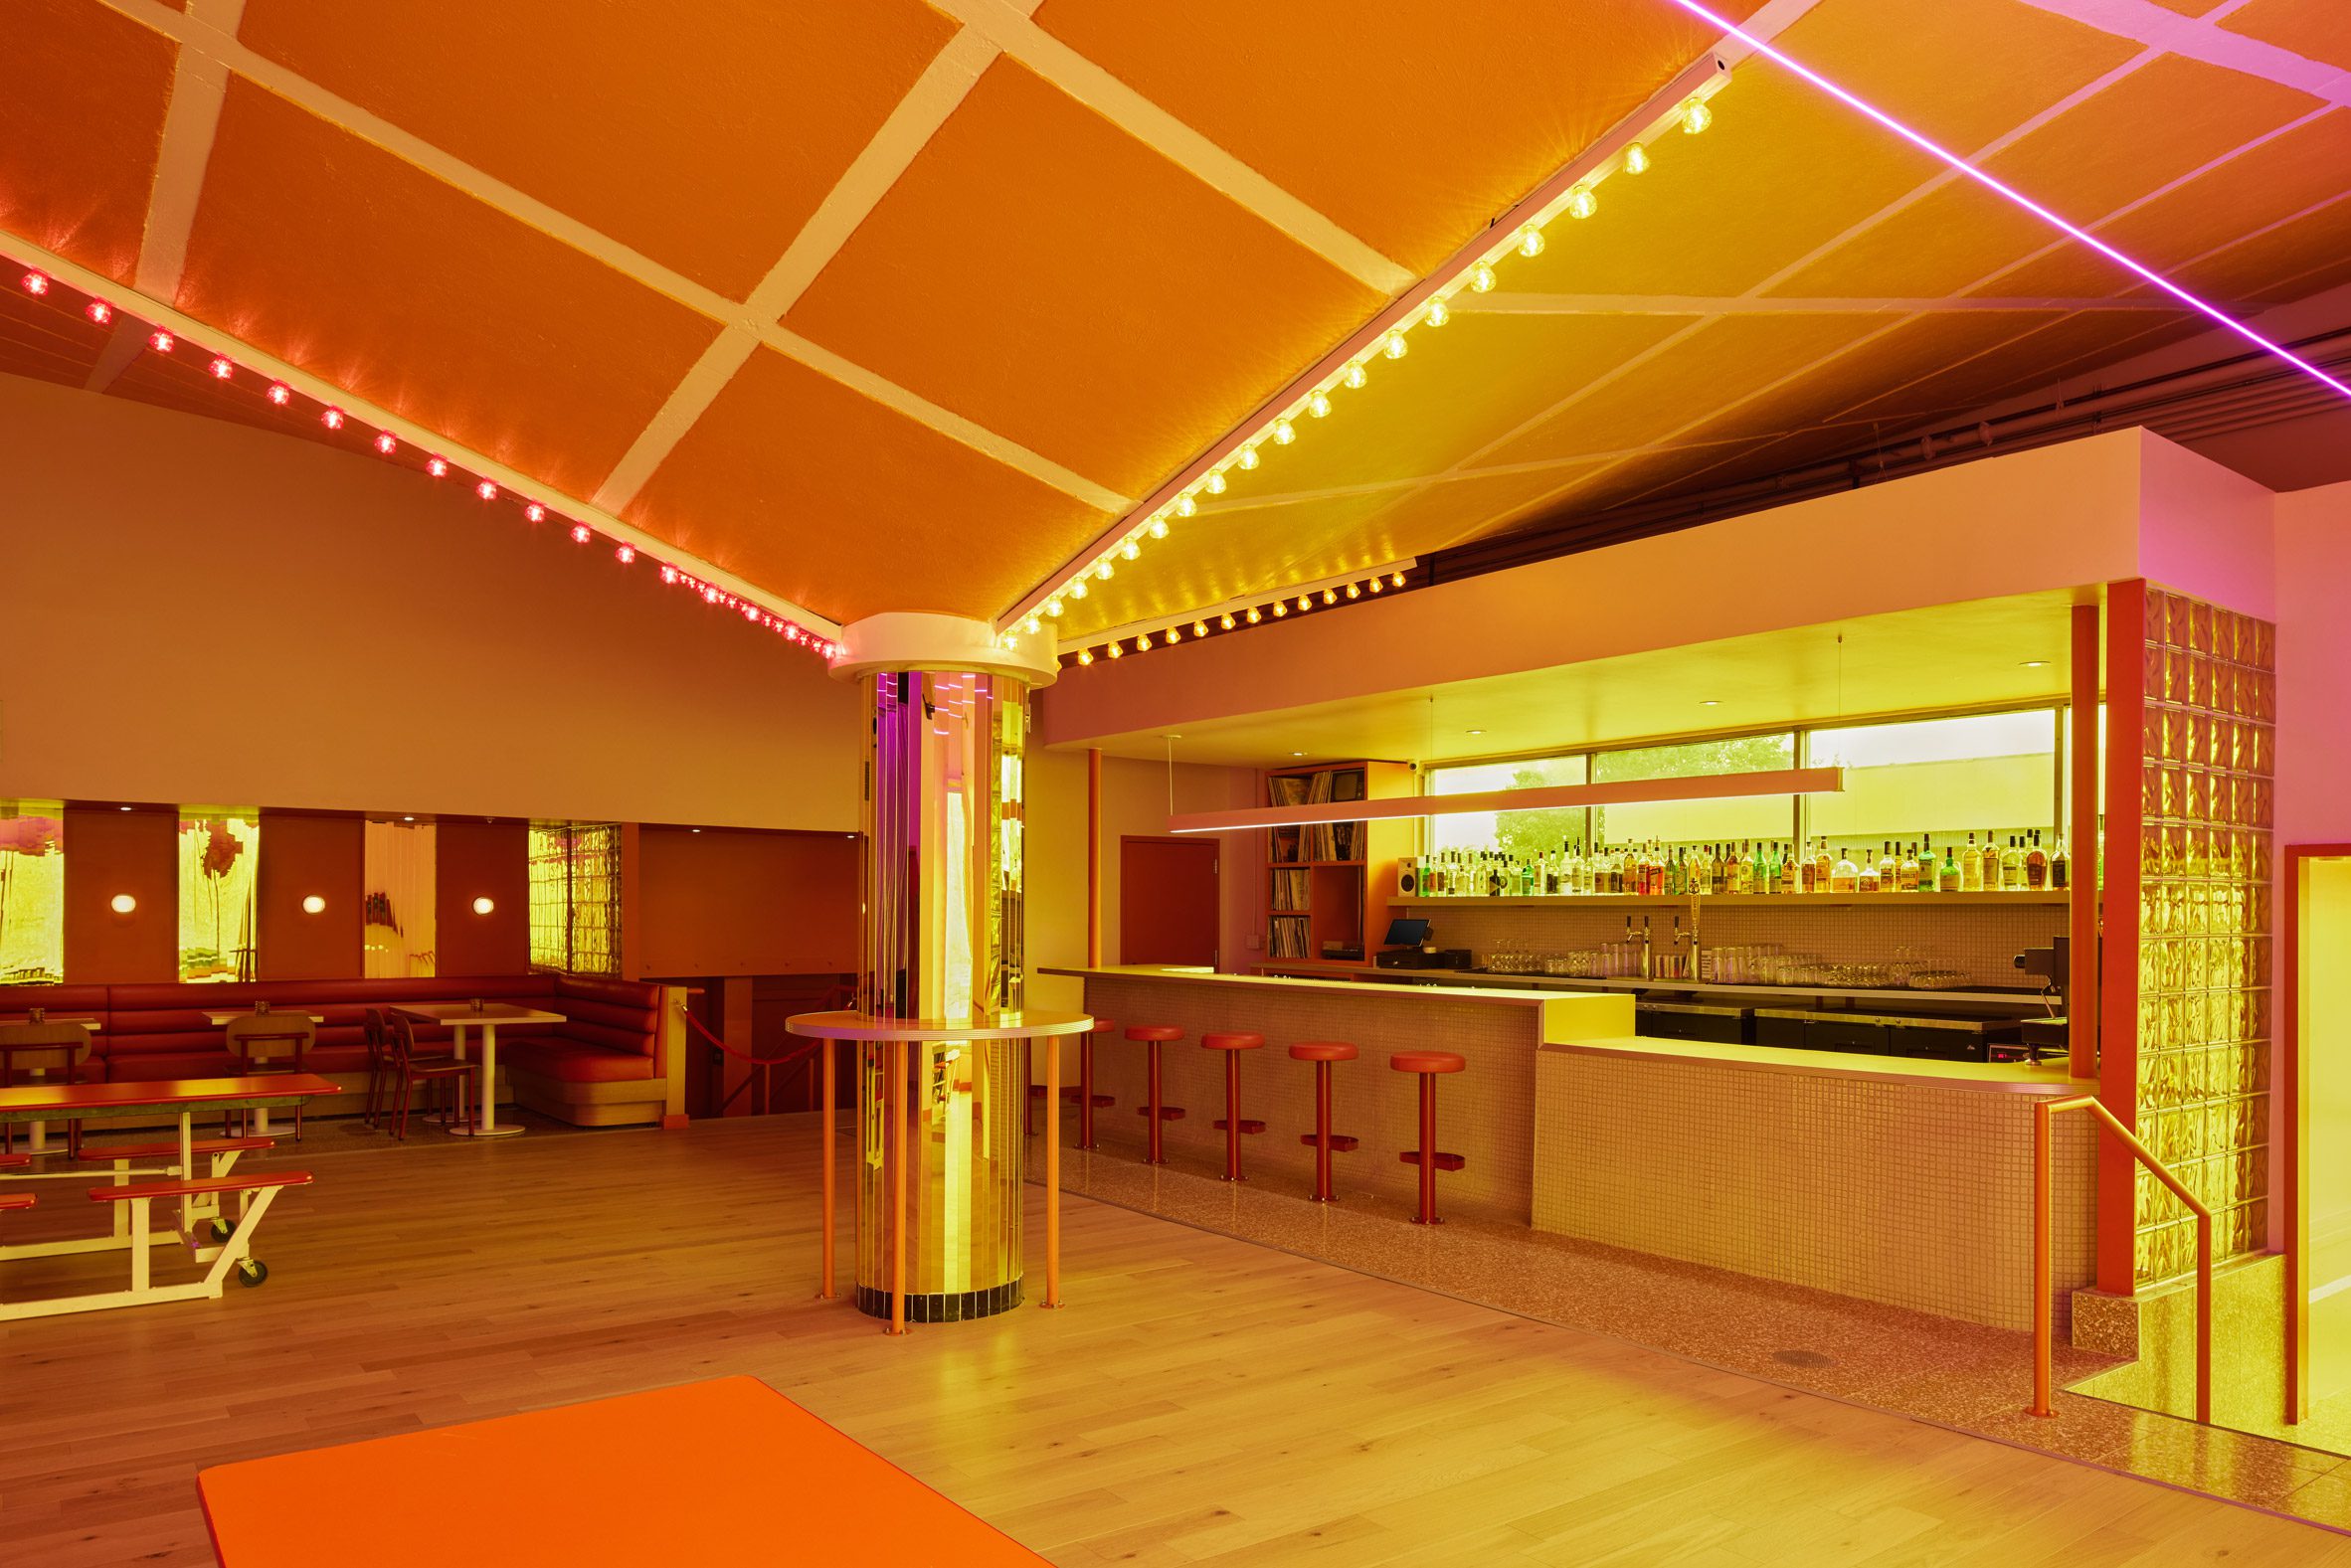 Nightclub with angled ceiling and central column